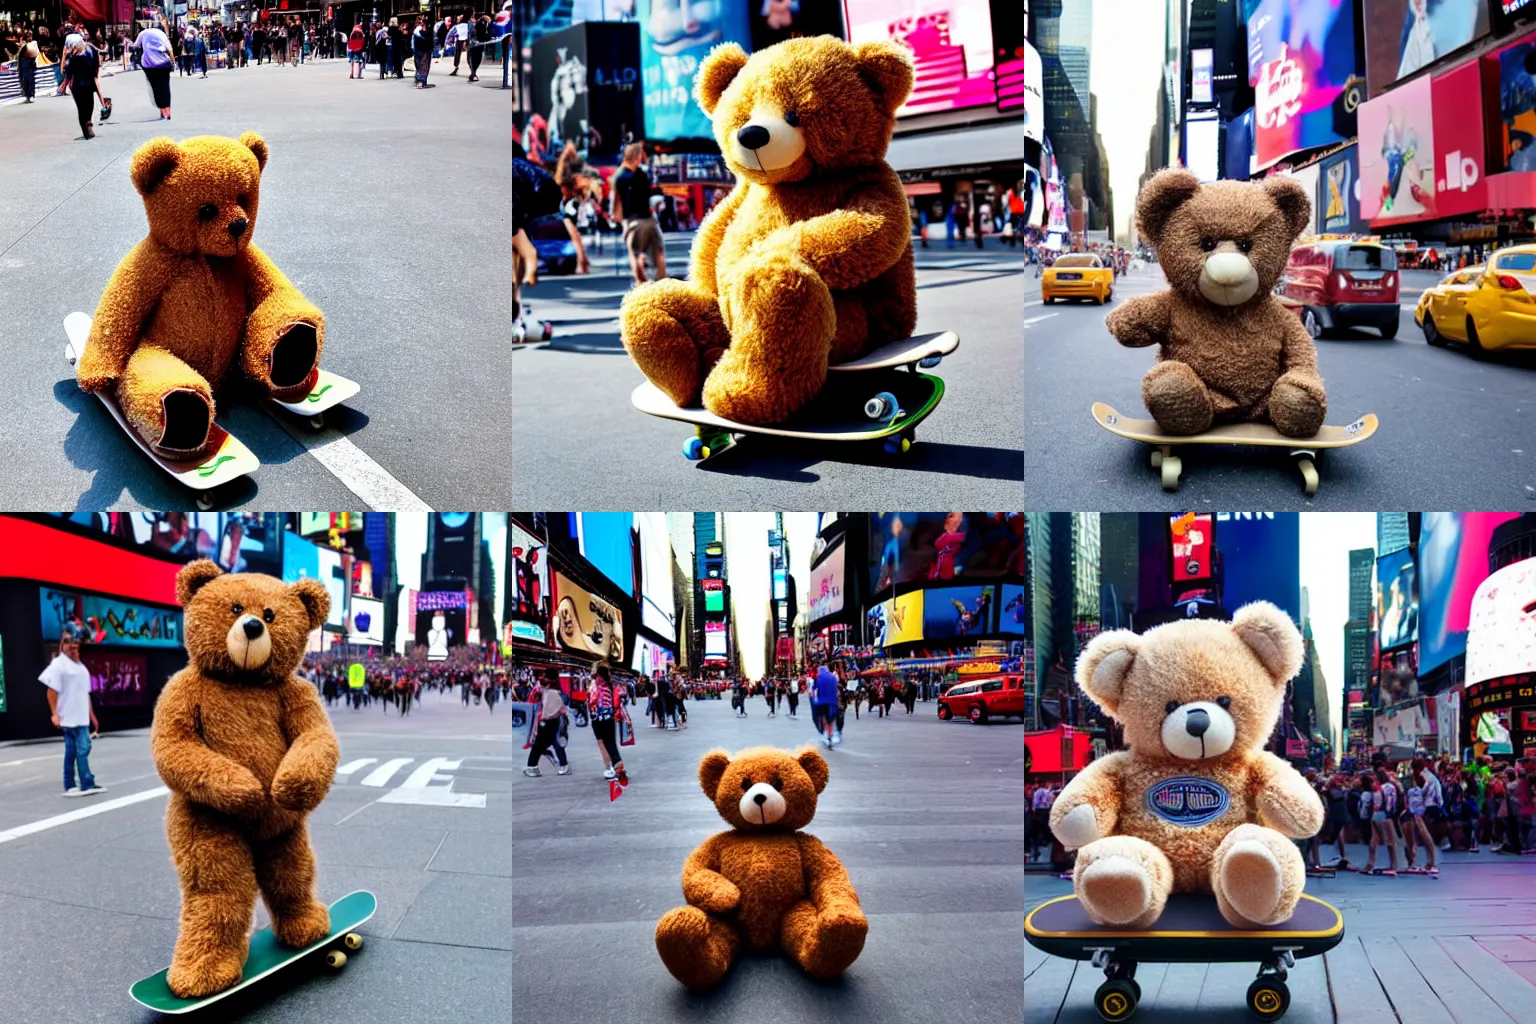 Prompt: photo of a teddy bear on a skateboard in times square